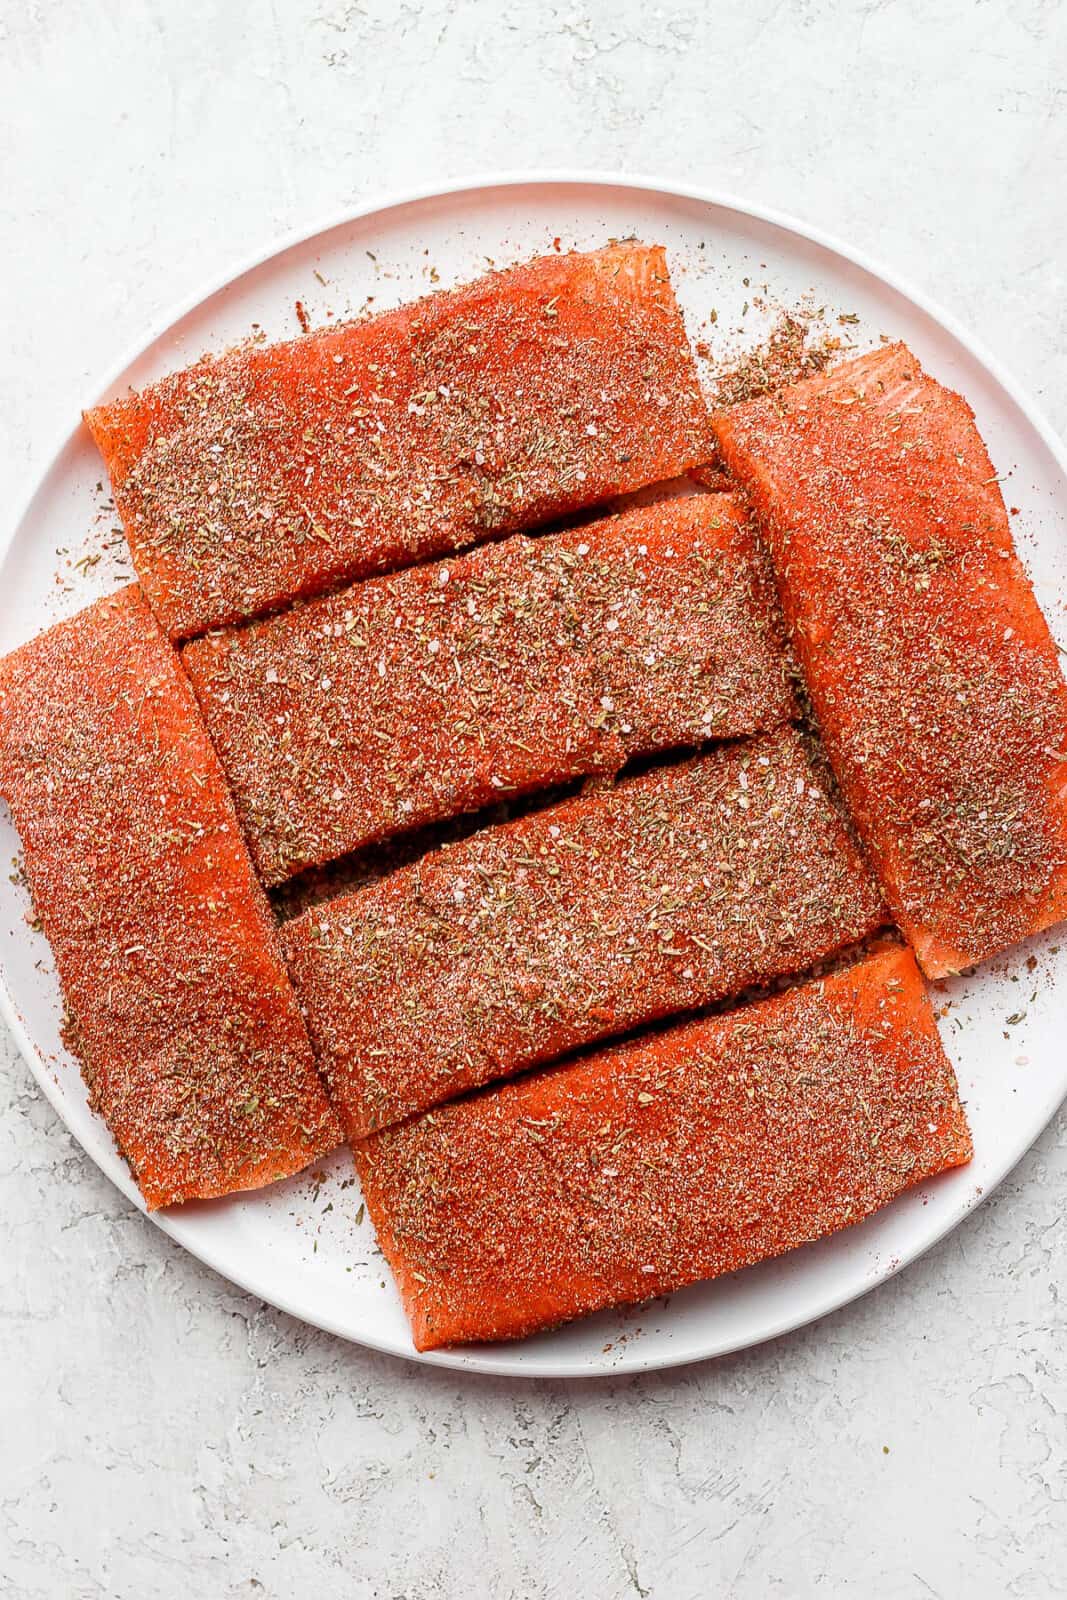 Plate of salmon covered in seasoning.